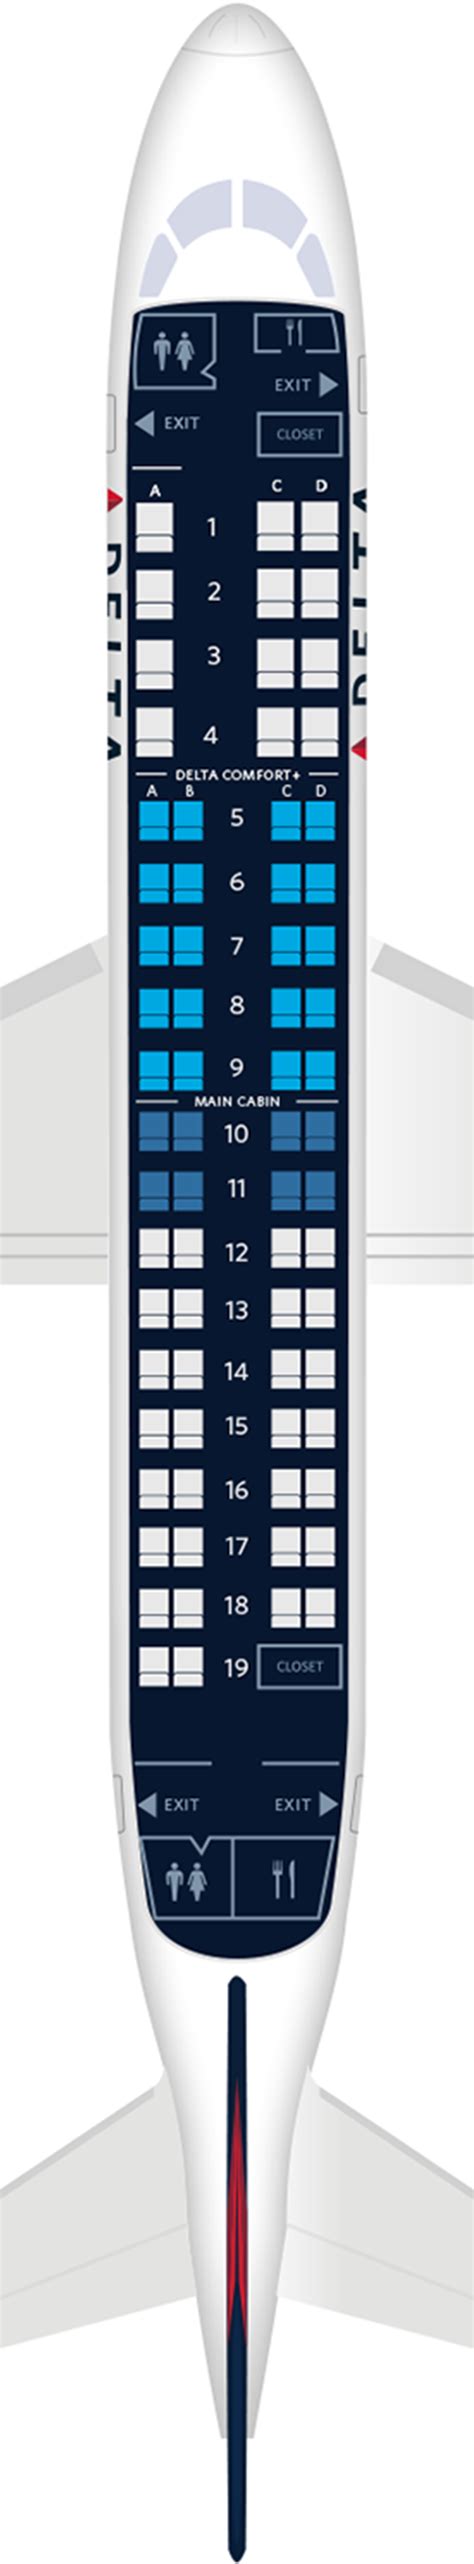  Seats very narrow and short arm rests dig into upper thighs for anyone close to full-grown adult. Flight was over 2 hours (on-time), but these should be avoided for anything over an hour. For your next American Airlines flight, use this seating chart to get the most comfortable seats, legroom, and recline on . . 